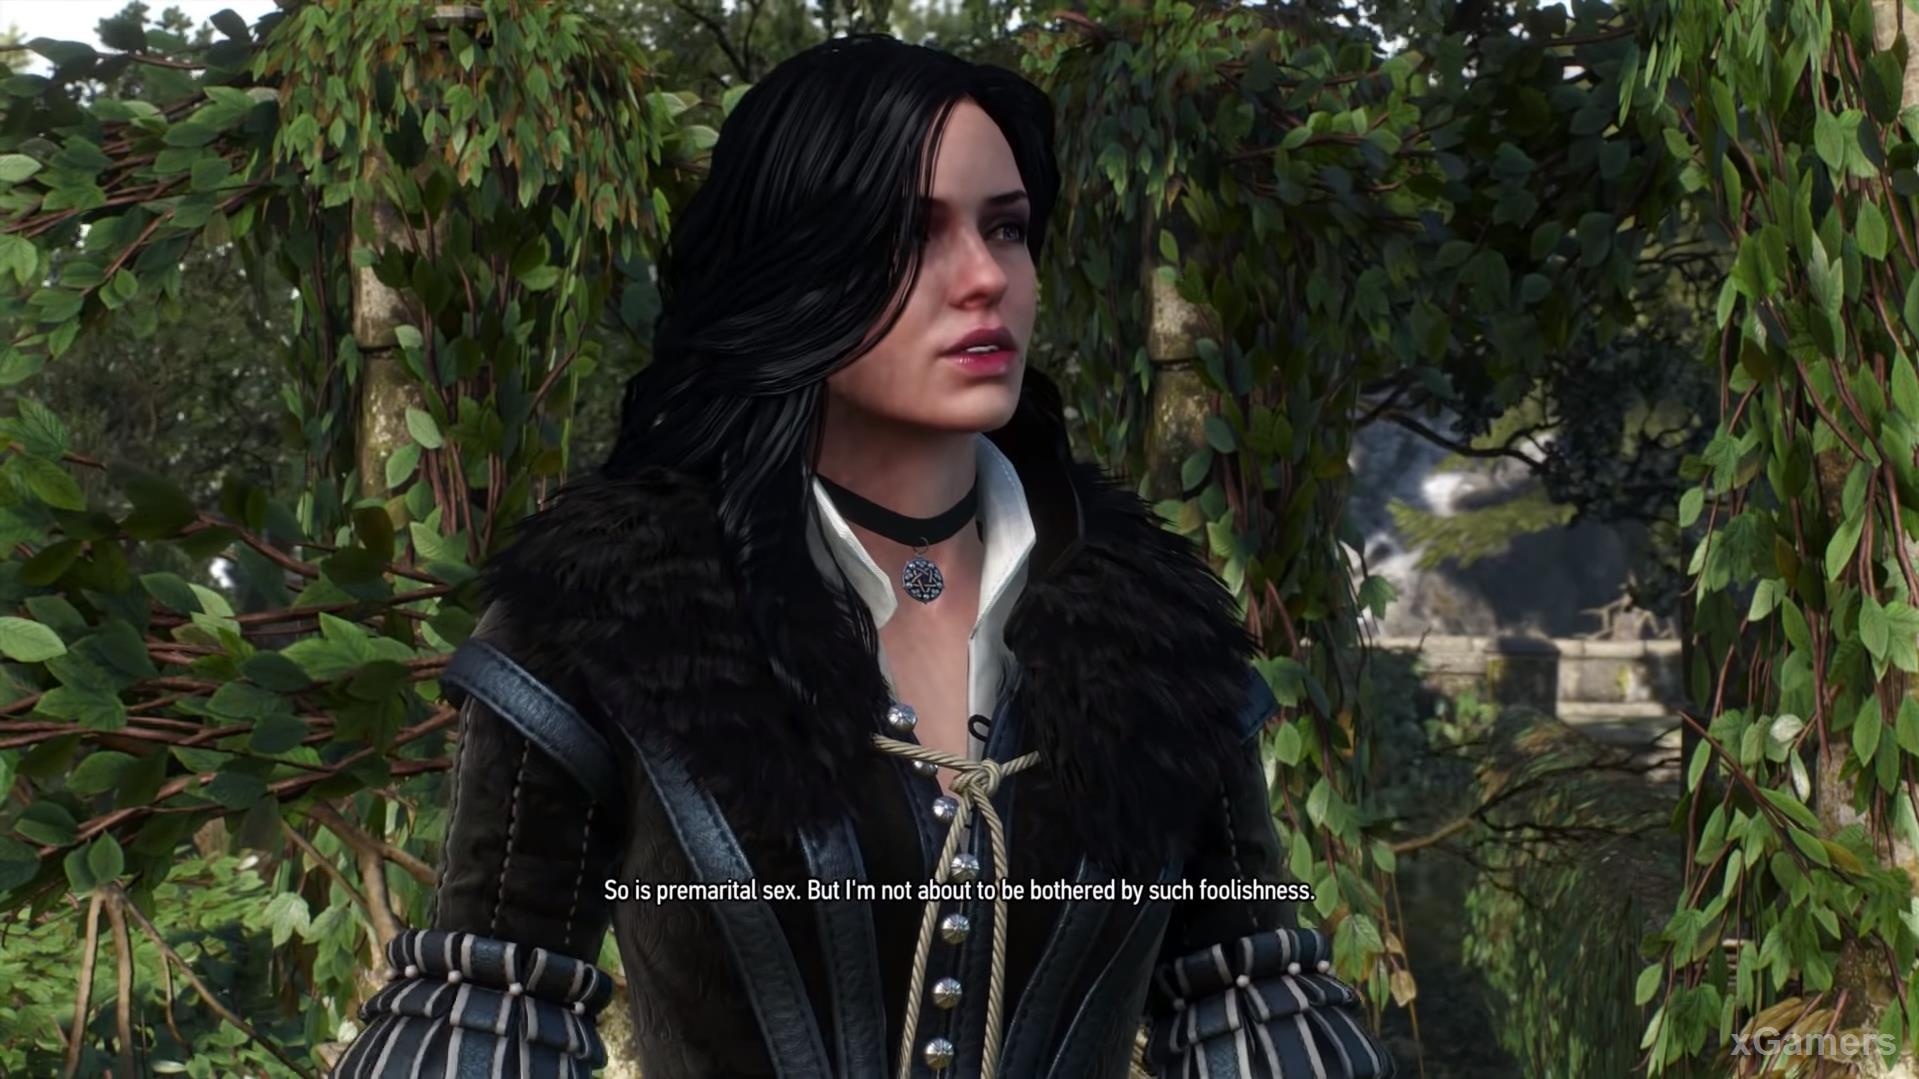 Yennefer  want use to get their way by means of necromancy